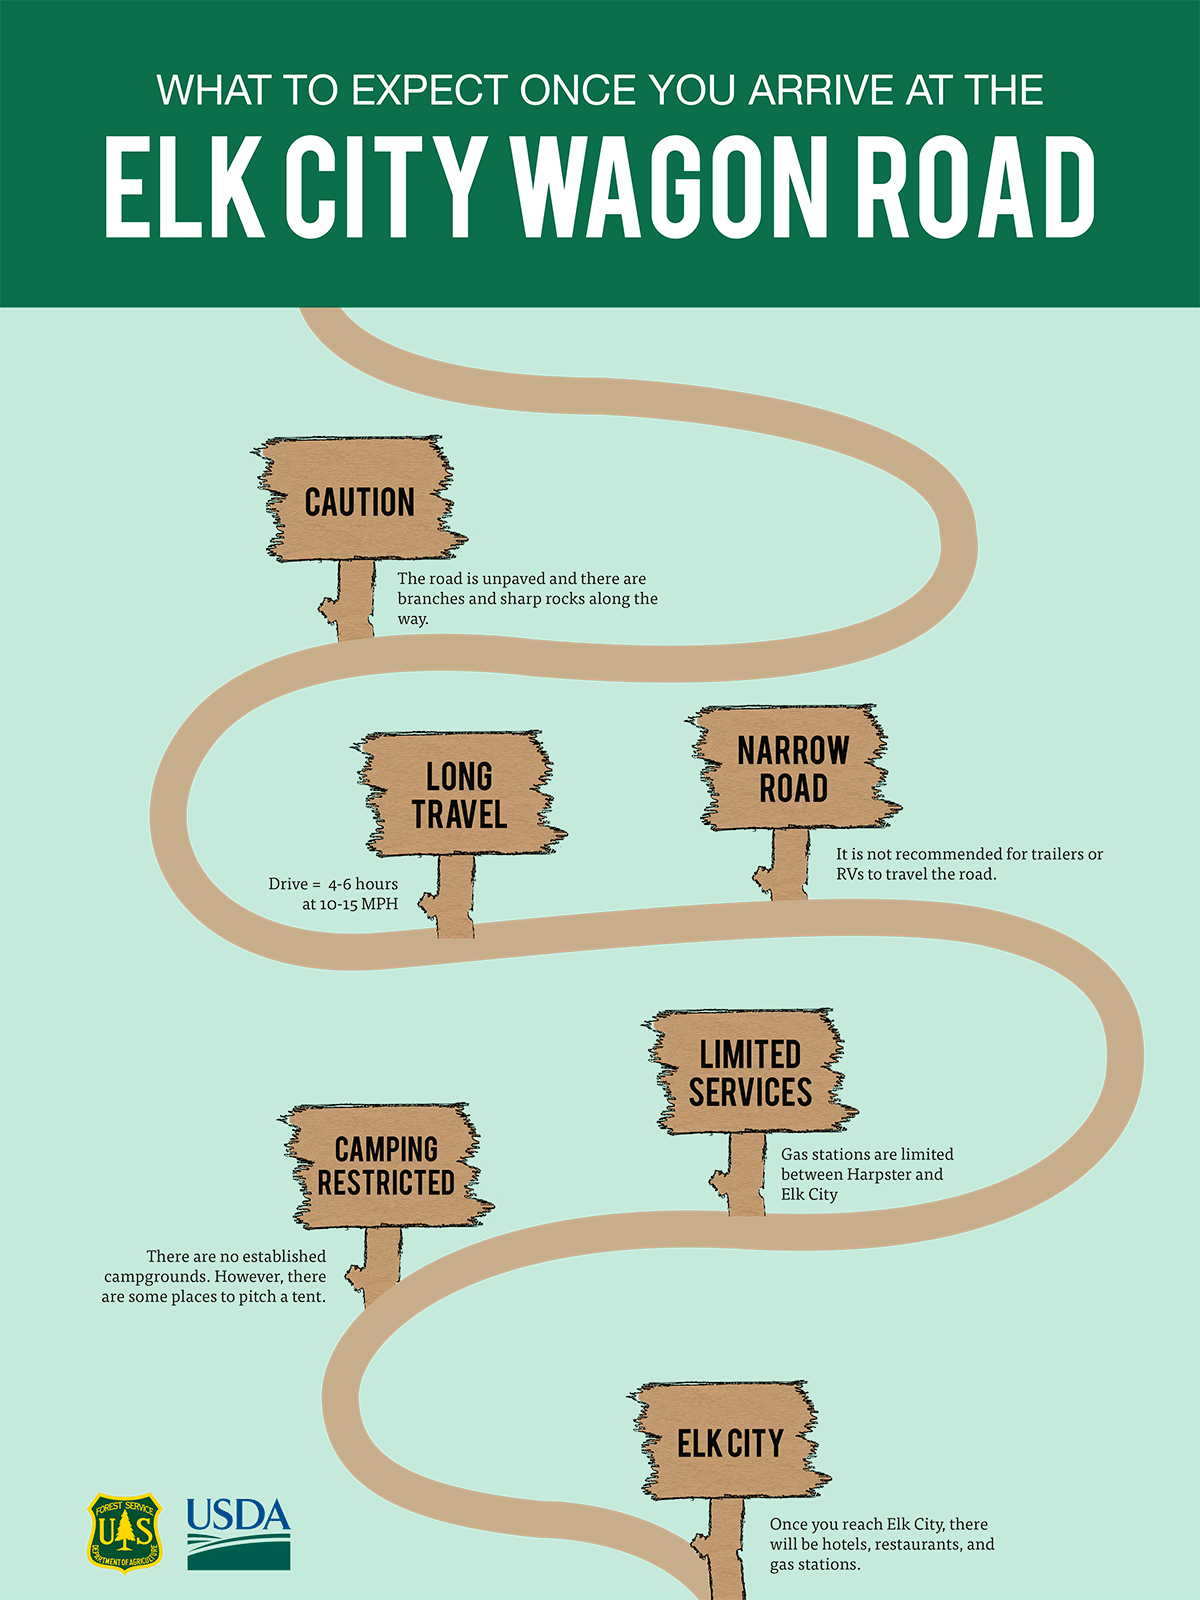 What to expect once you arrive at the Elk City Wagon Road.